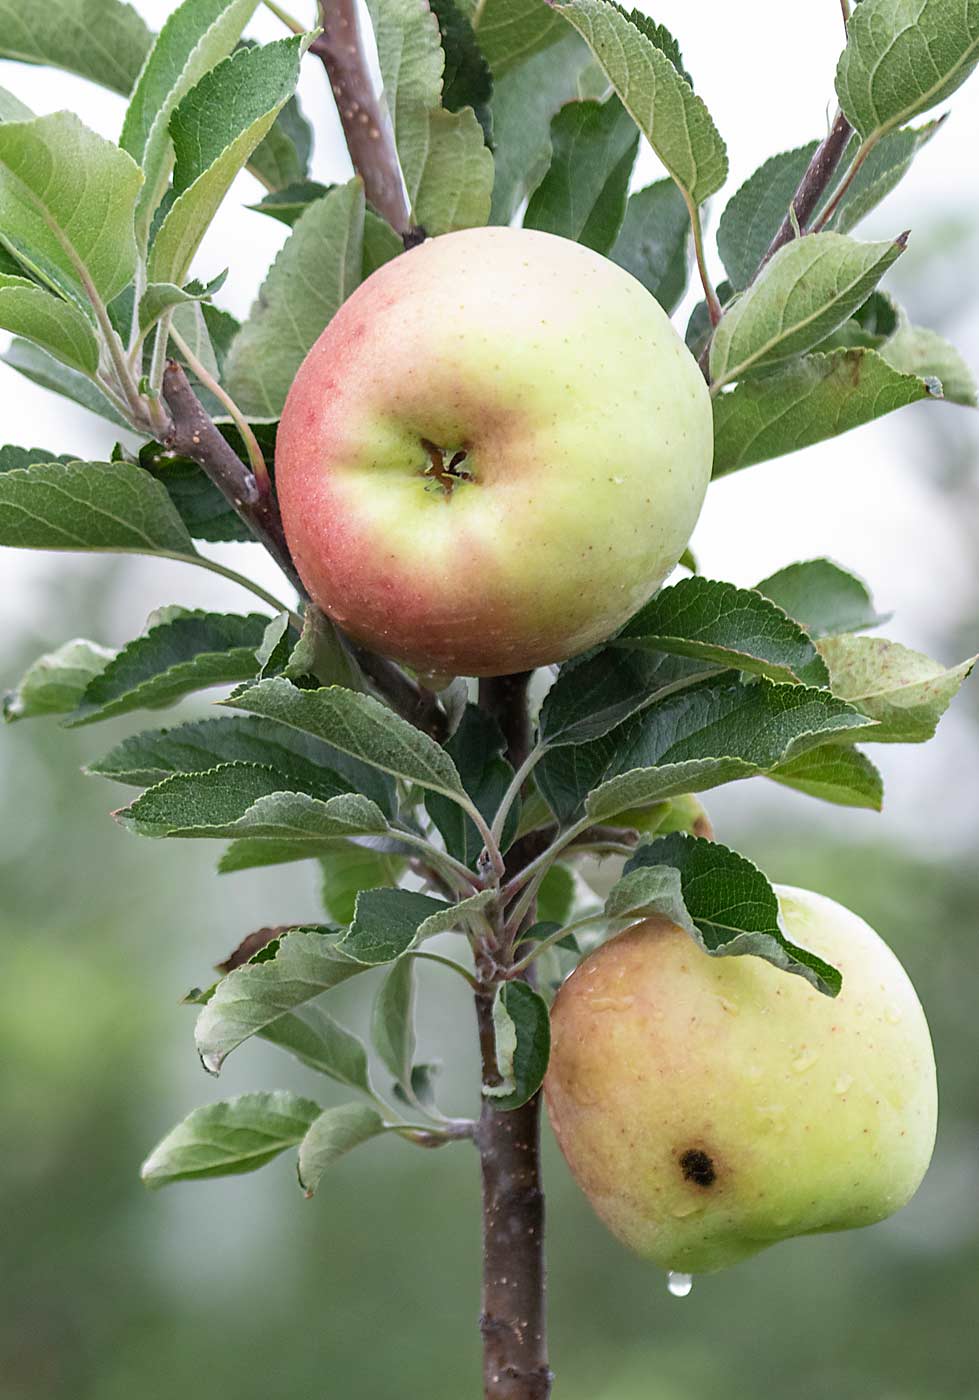 Blake Slaybaugh tries to keep the trees trained to reduce limb rub on the fruit and, like other varieties at his family farm in Biglerville, has found Ambrosia gets hit with apple scab. (TJ Mullinax/Good Fruit Grower)